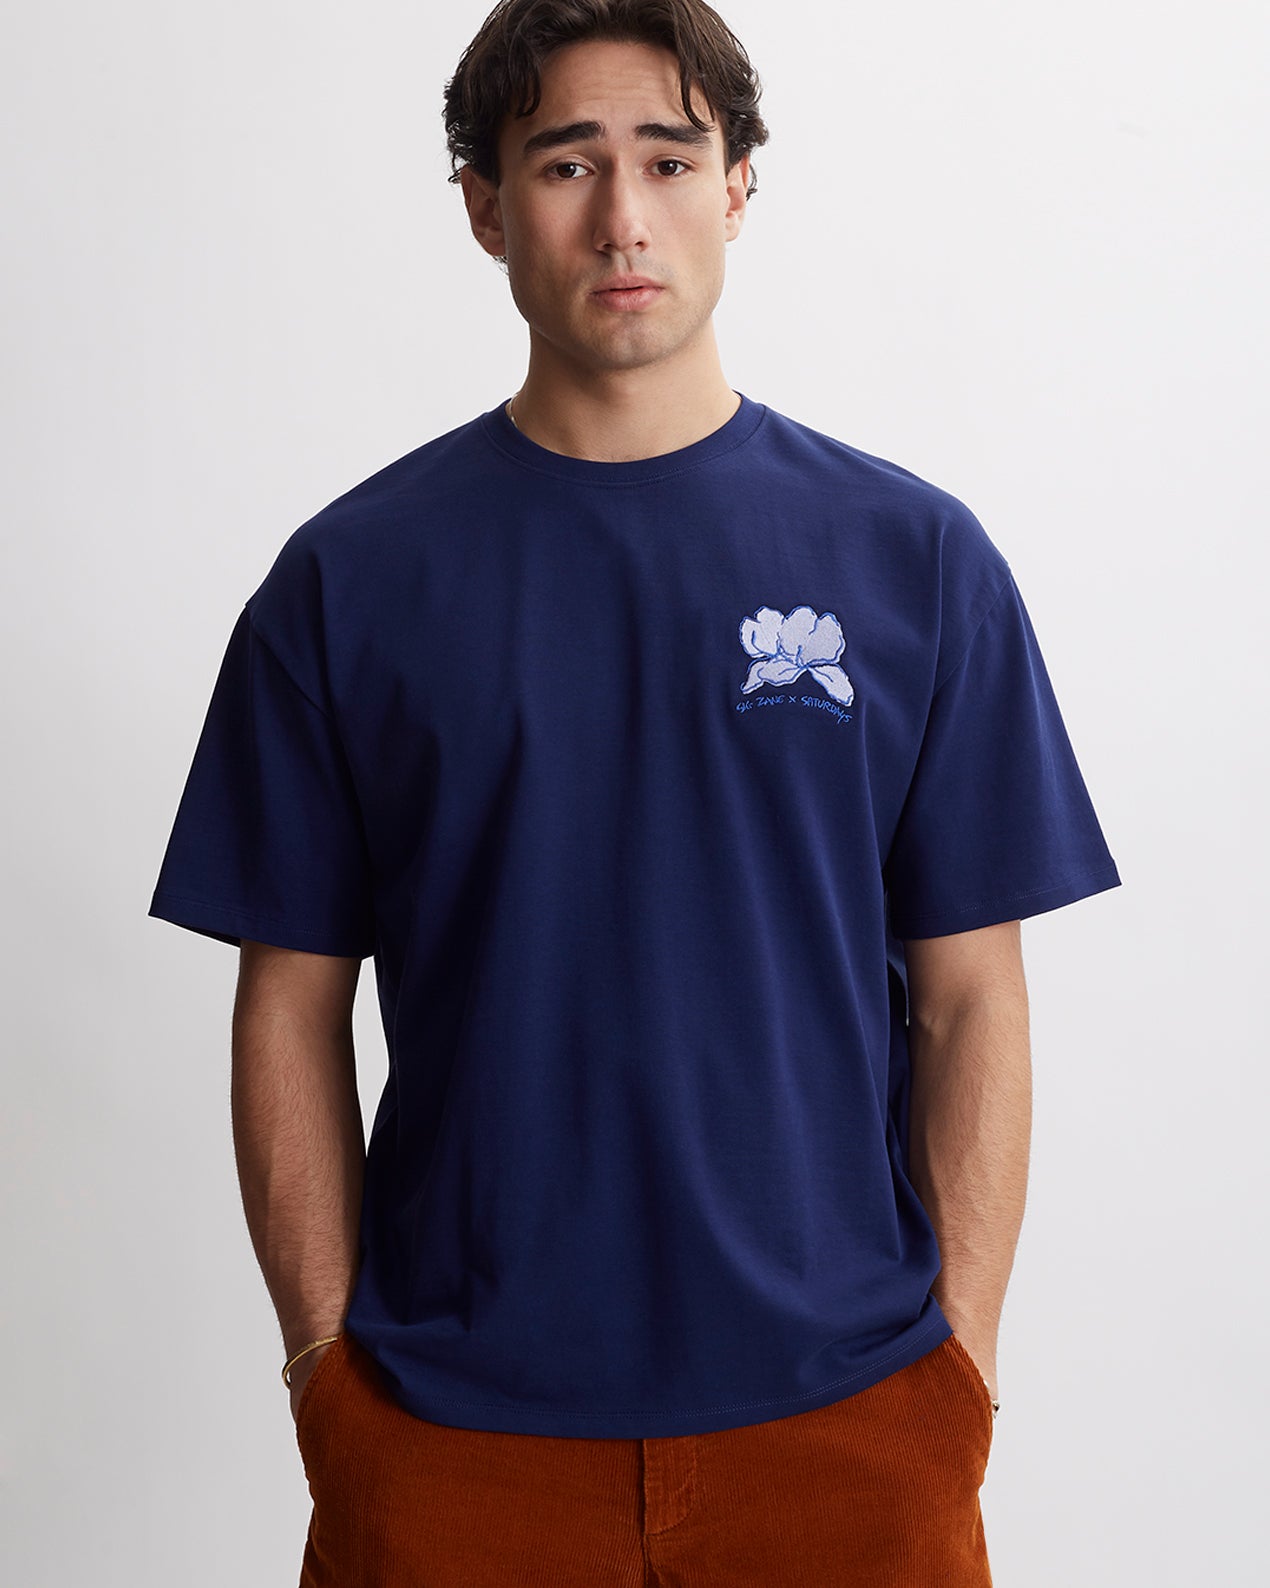 SZ SNYC Relaxed Fit Short Sleeve Tee | Saturdays NYC